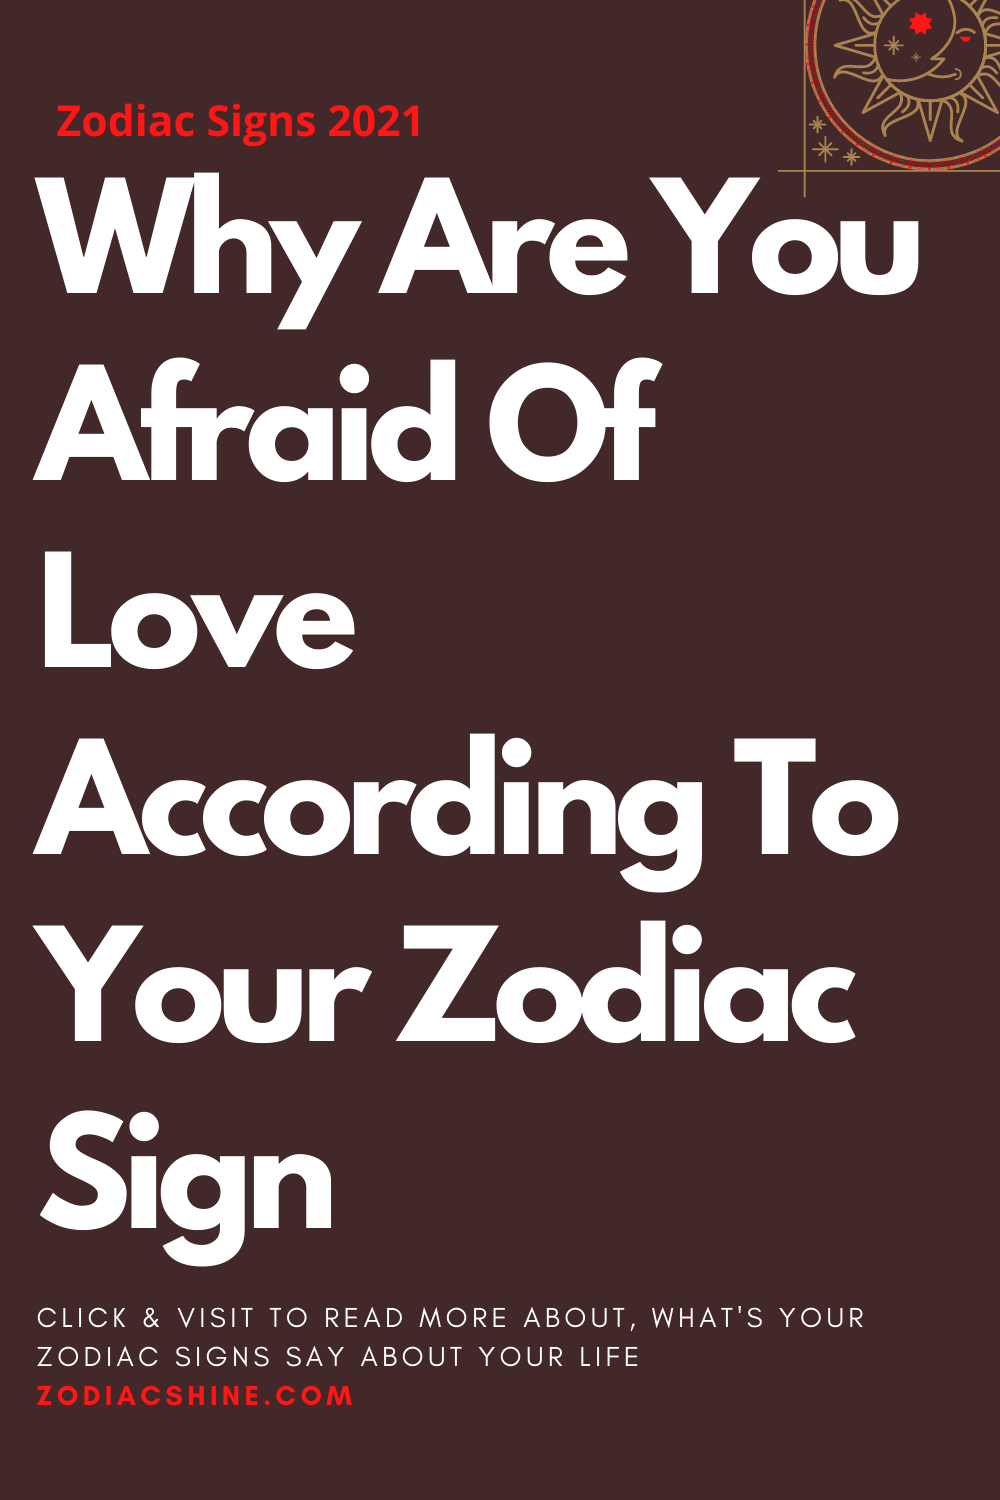 Why Are You Afraid Of Love According To Your Zodiac Sign